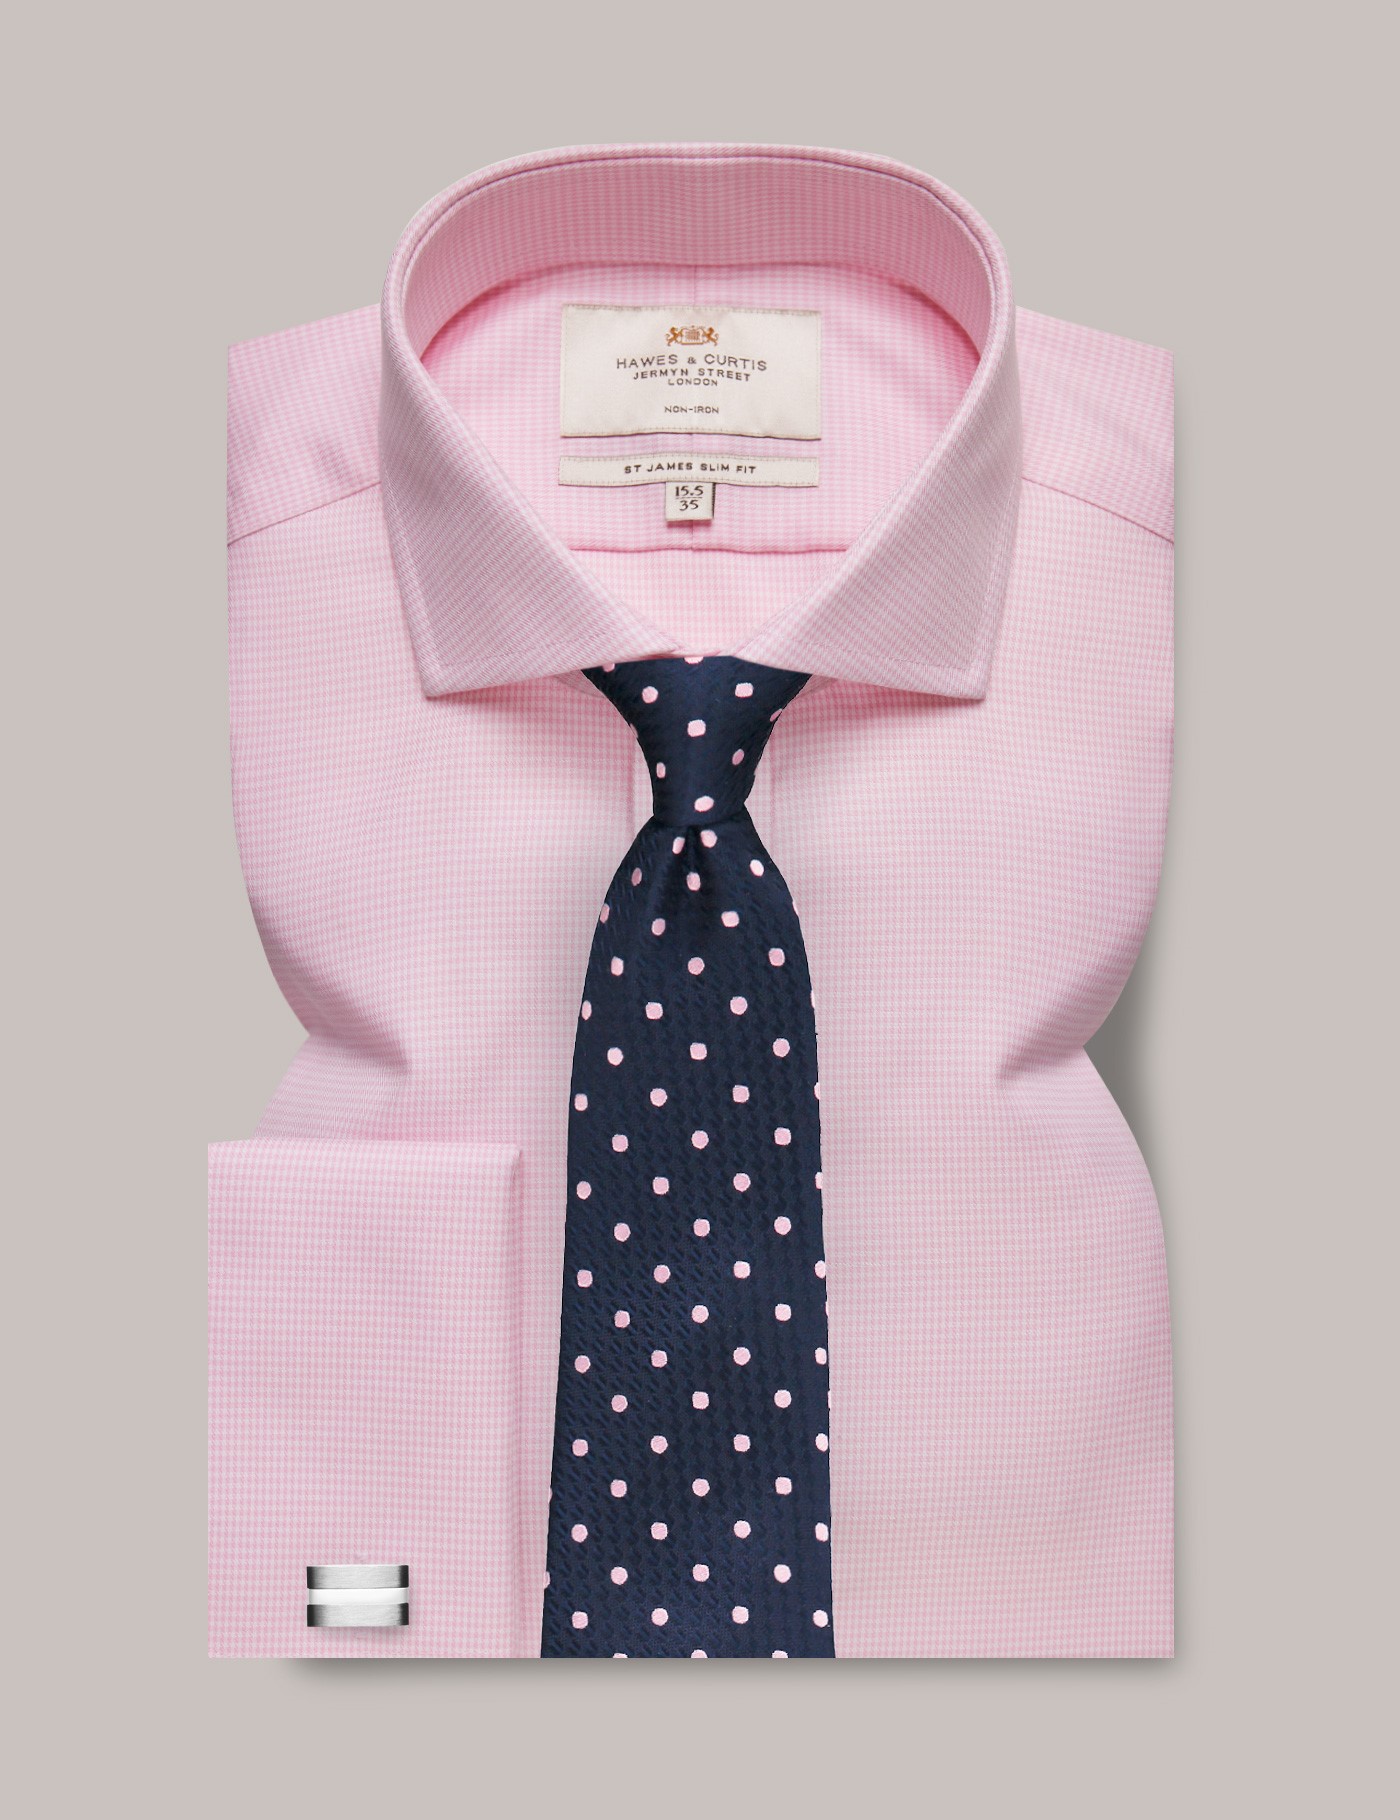 Men's Non-Iron Pink & White Dogtooth Slim Fit Shirt with Windsor Collar ...